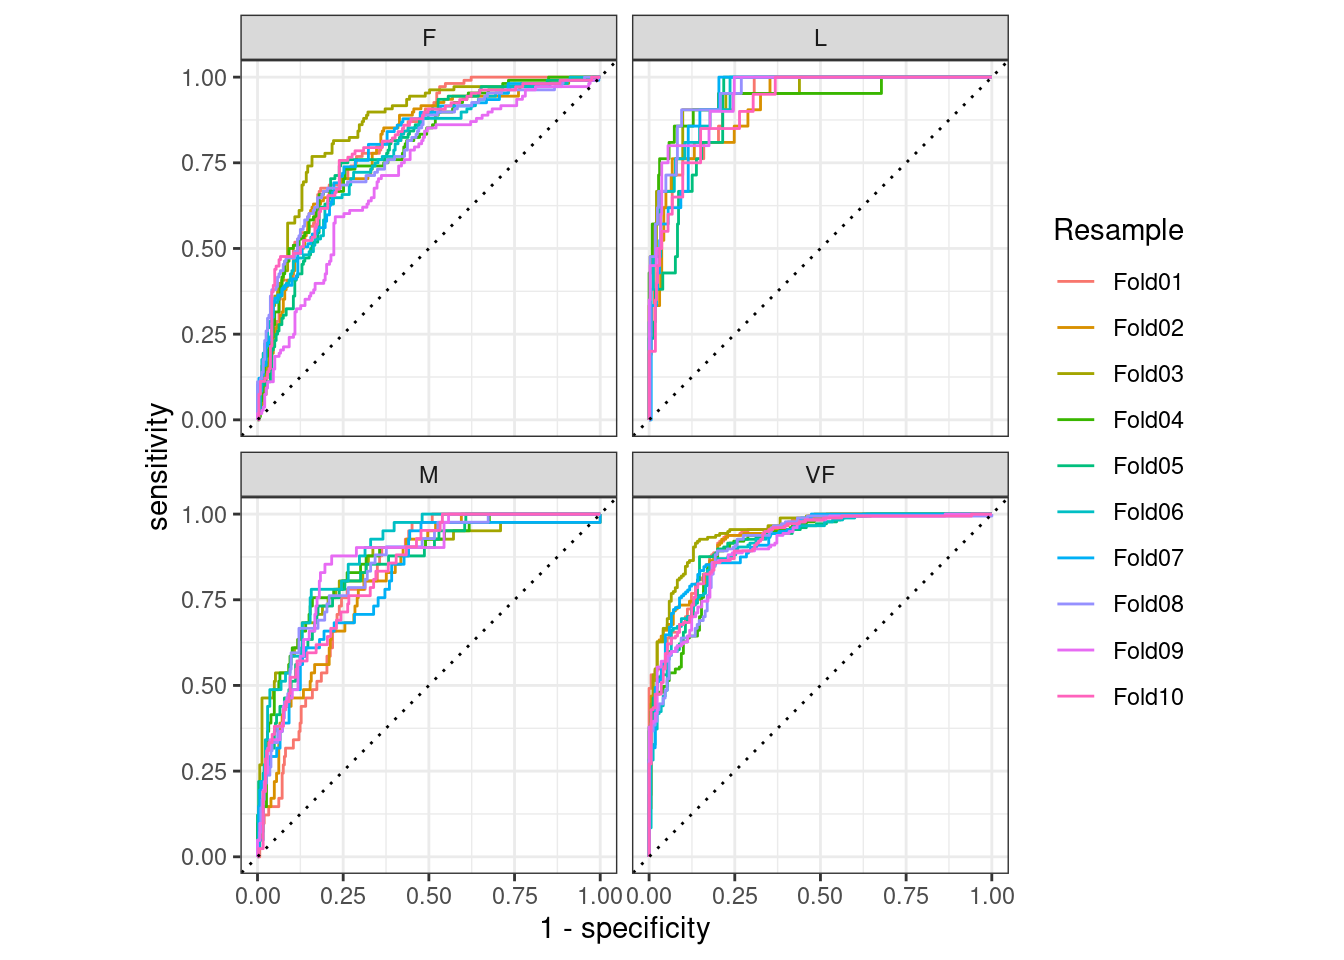 Resampled ROC curves for each of the four outcome classes. There are four panels for classes VF, F, M, and L. Each panel contains ten ROC curves for each of the resampled data sets.